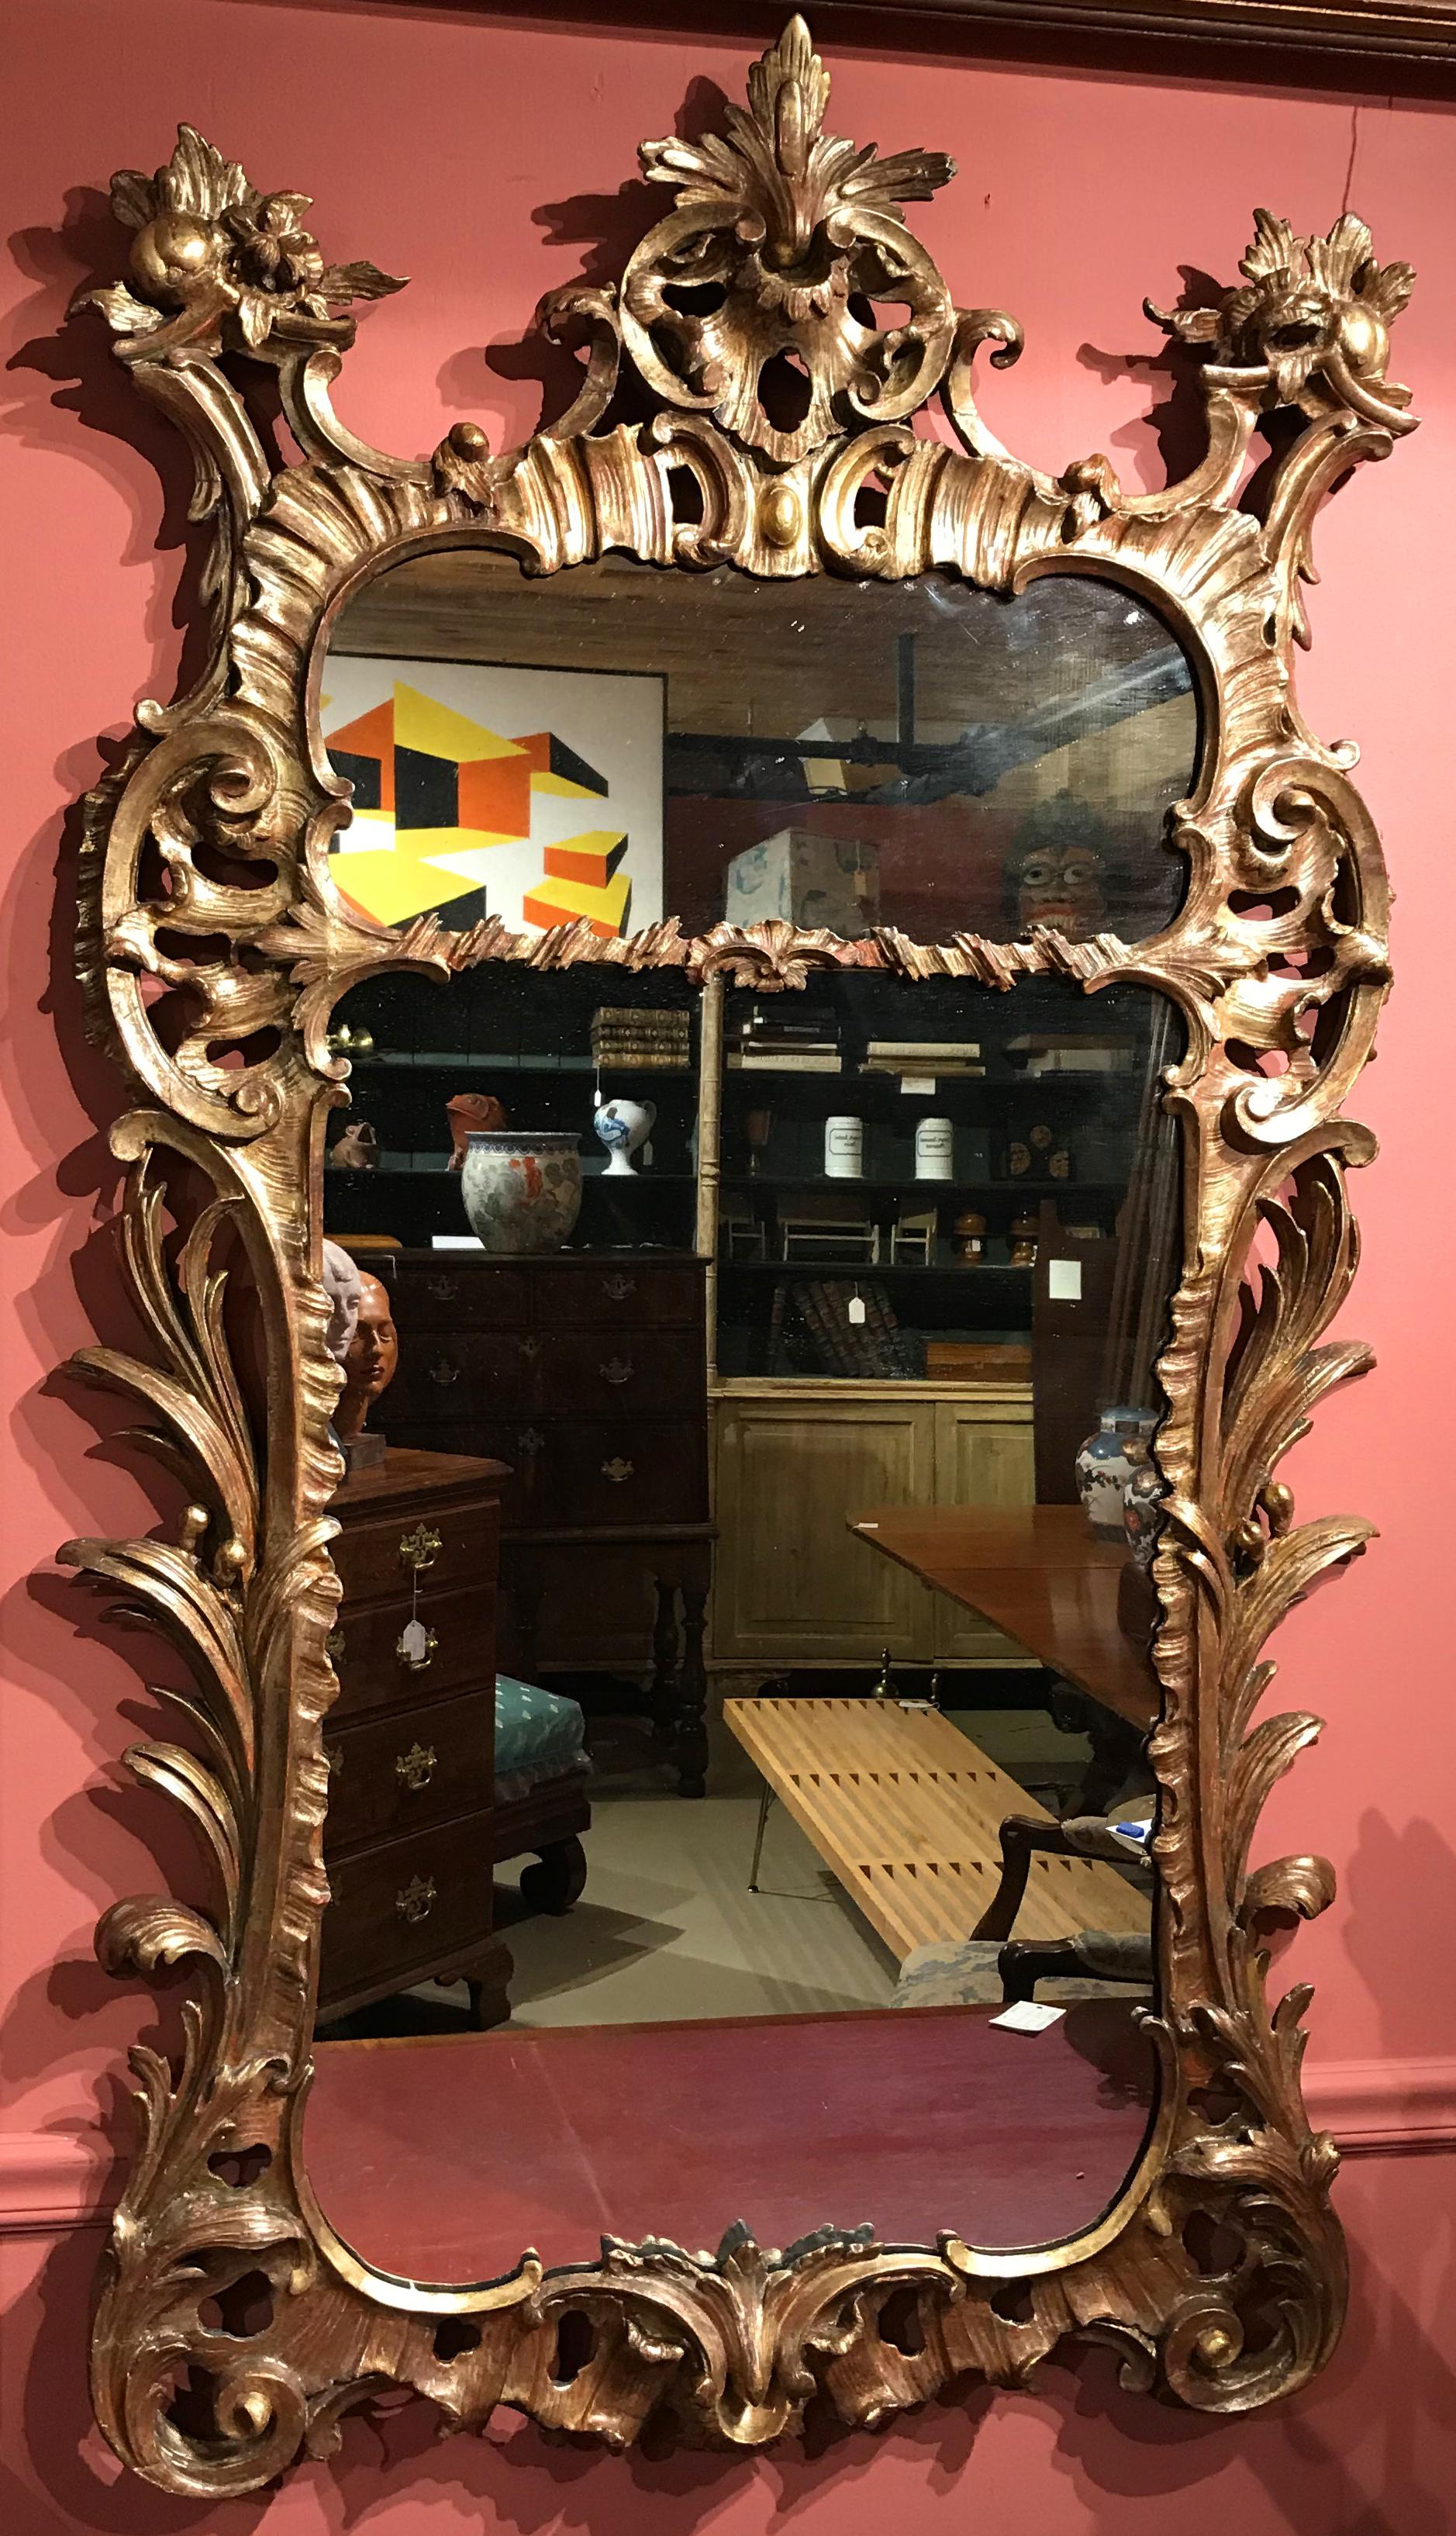 An exceptional polychrome giltwood English Rococo mirror, with a fine pierce-carved scrollwork surround, dating to the 18th century in very good to excellent overall condition, with minor imperfections, losses, and light expected wear from age and